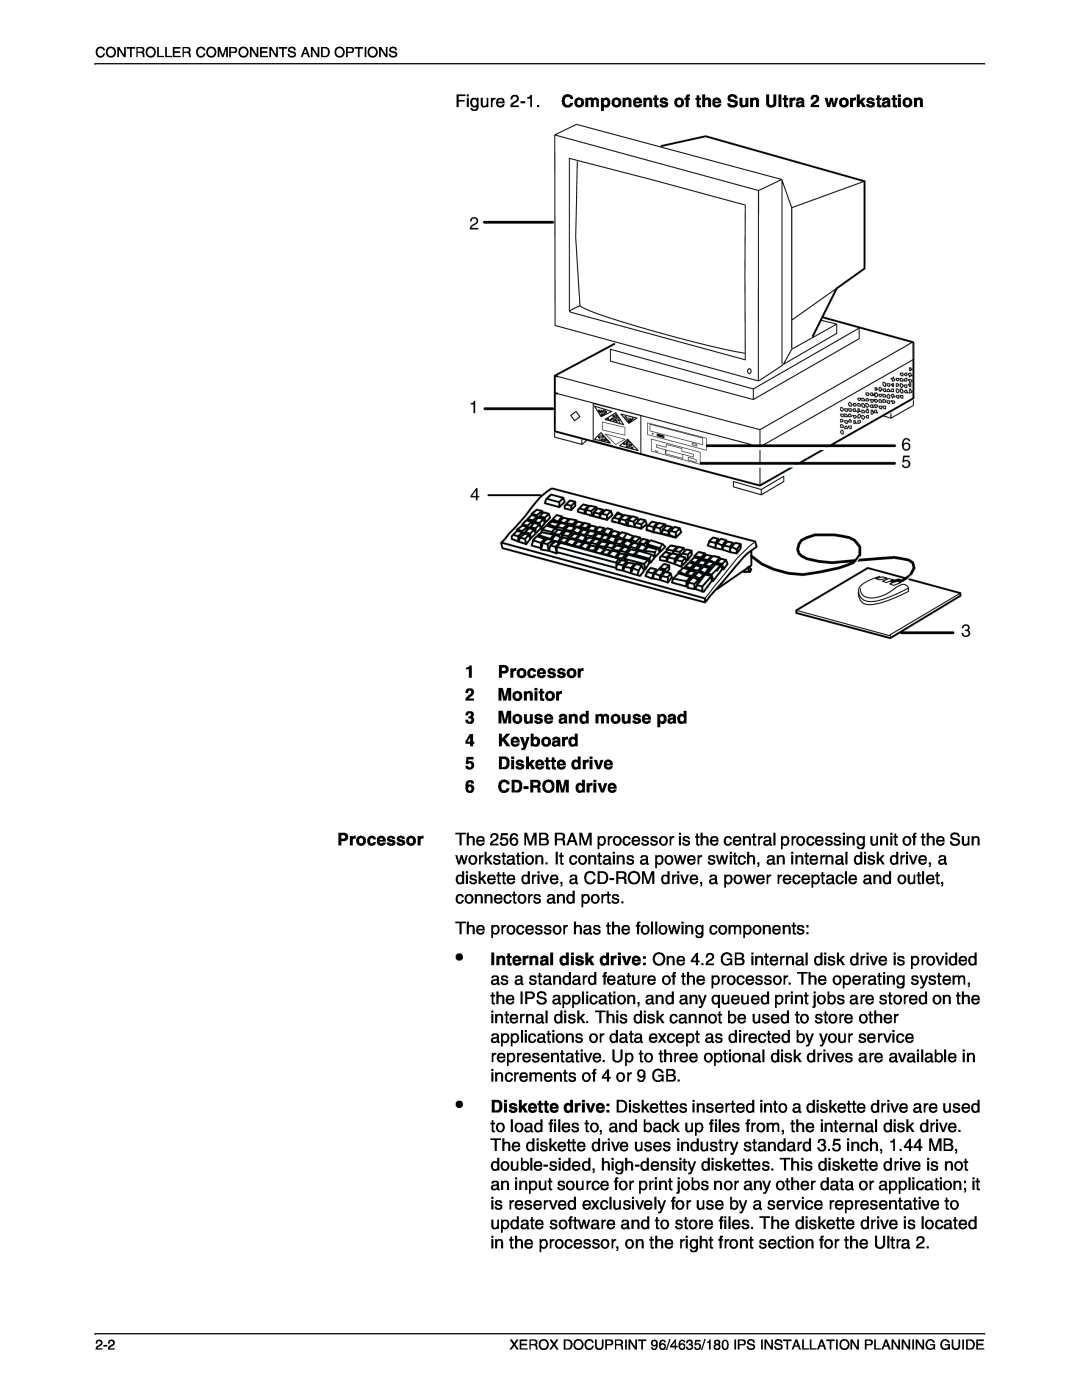 Xerox 180 IPS manual 2 1 6 5 4 3, 1Processor 2Monitor 3Mouse and mouse pad, 4Keyboard 5Diskette drive 6CD-ROMdrive 